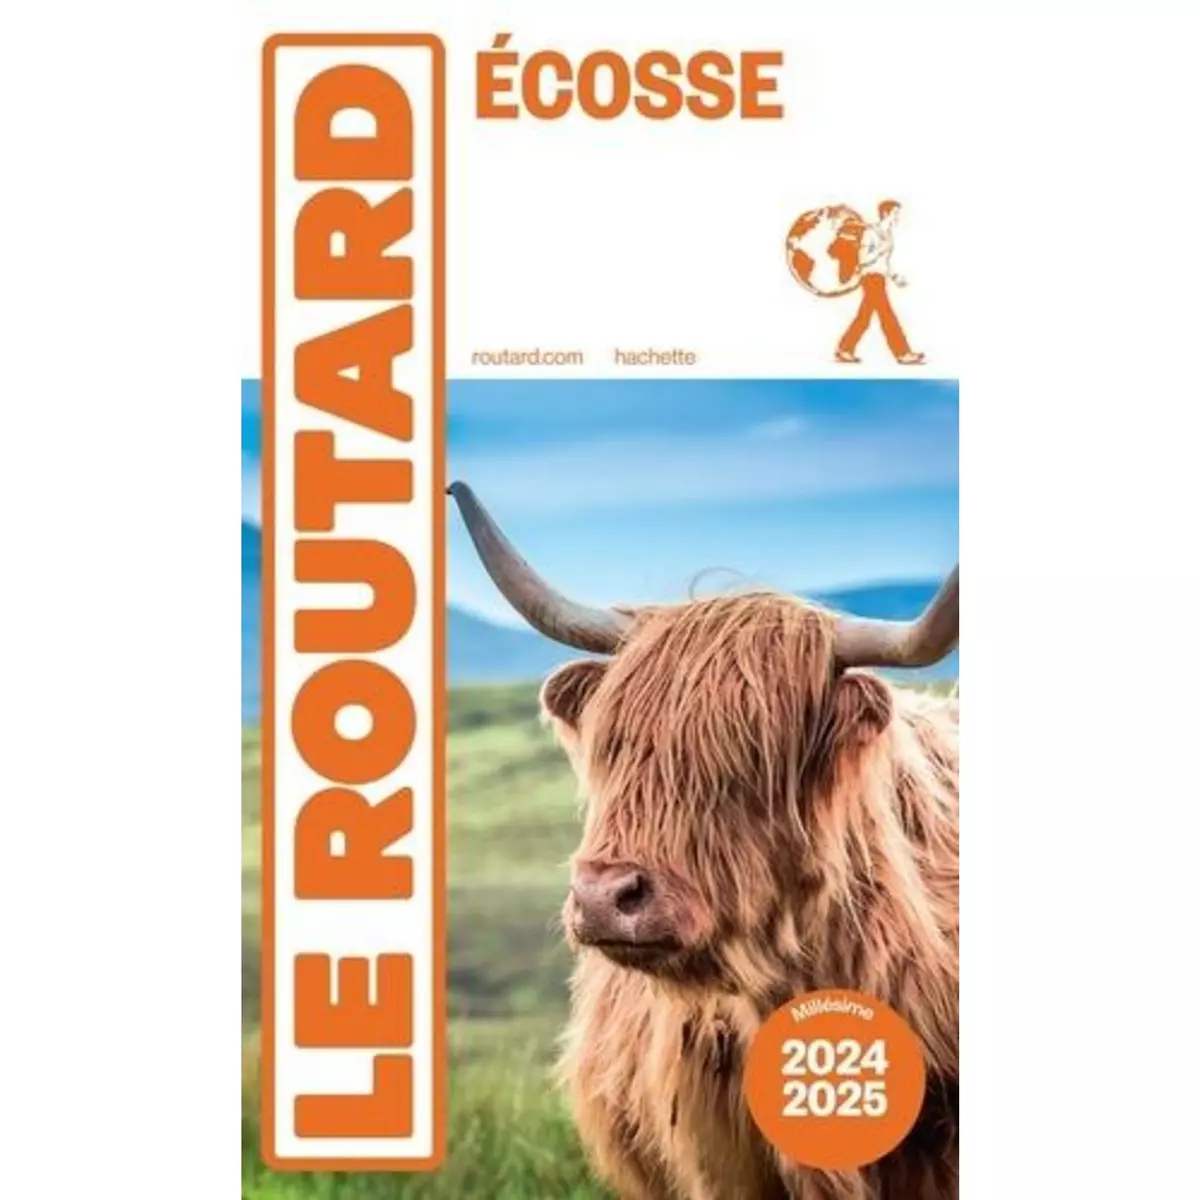  ECOSSE. EDITION 2024-2025, Le Routard